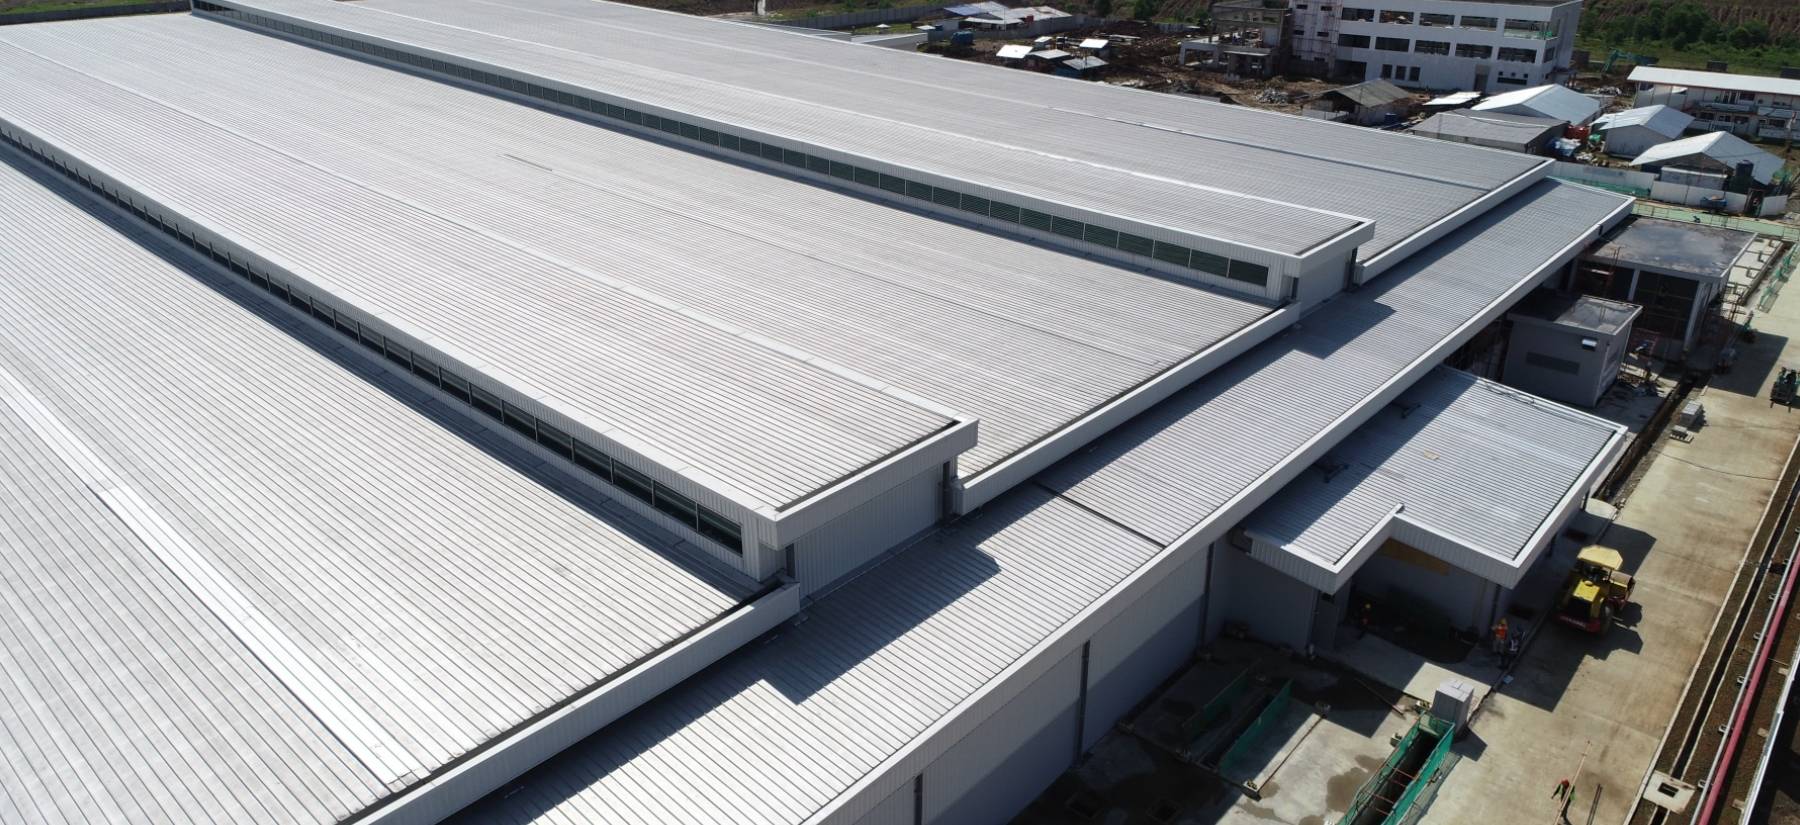 Metal Roofing Sheets & Wall Cladding Solutions | Tata BlueScope Steel